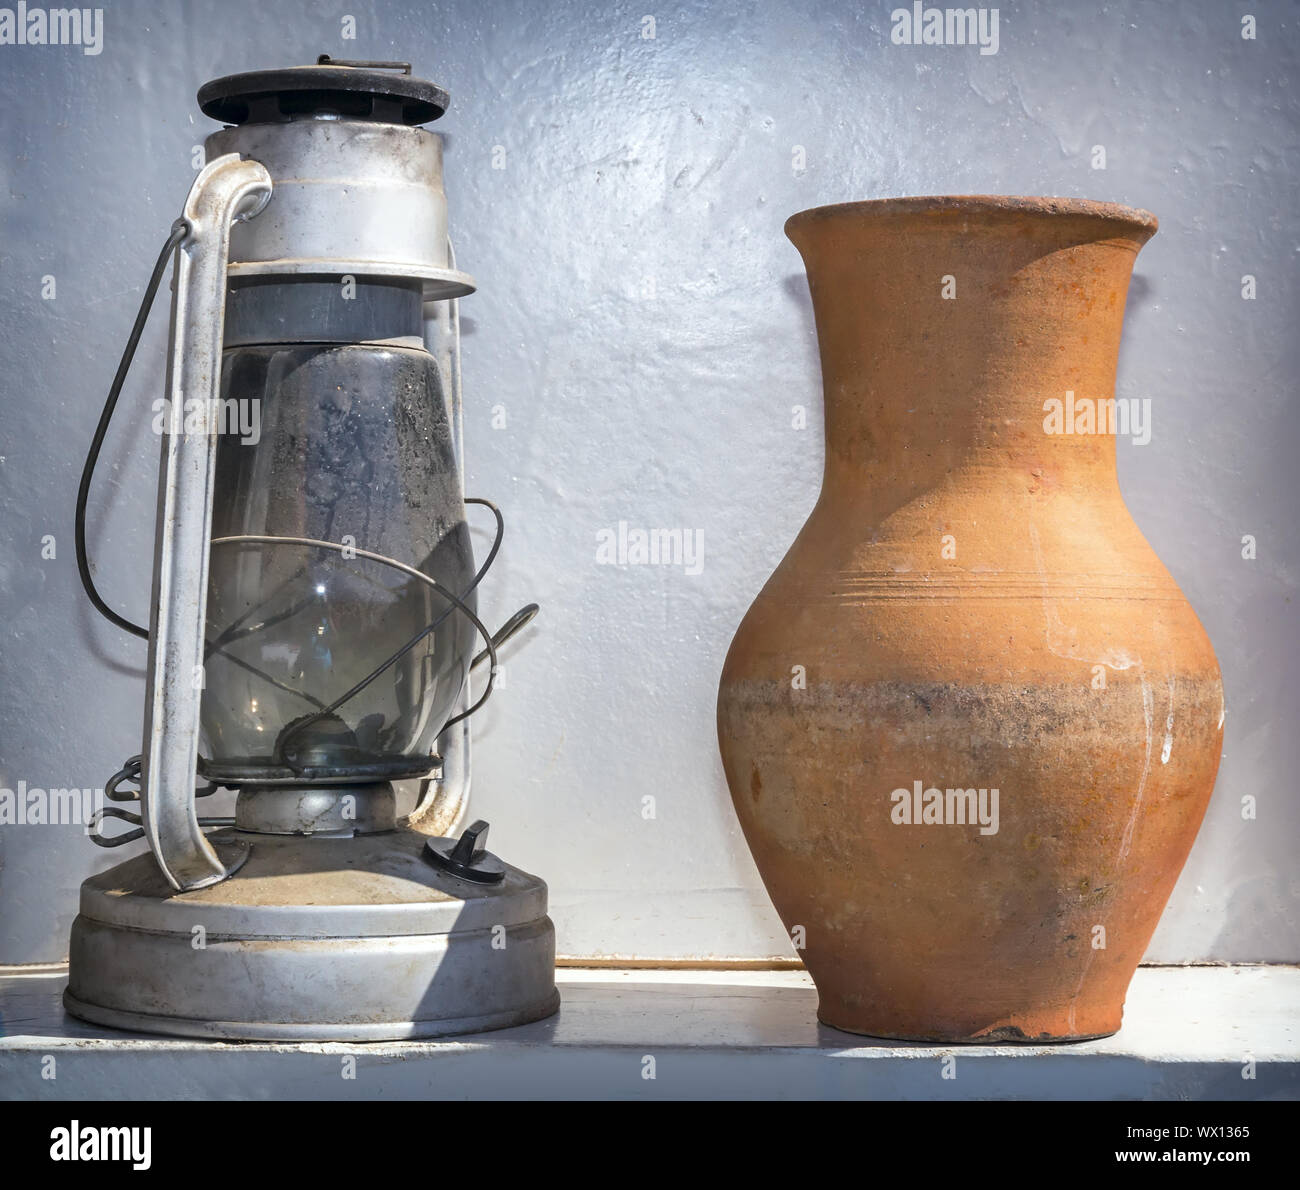 Antique objects of everyday life: a kerosene lamp and a pitcher. Stock Photo